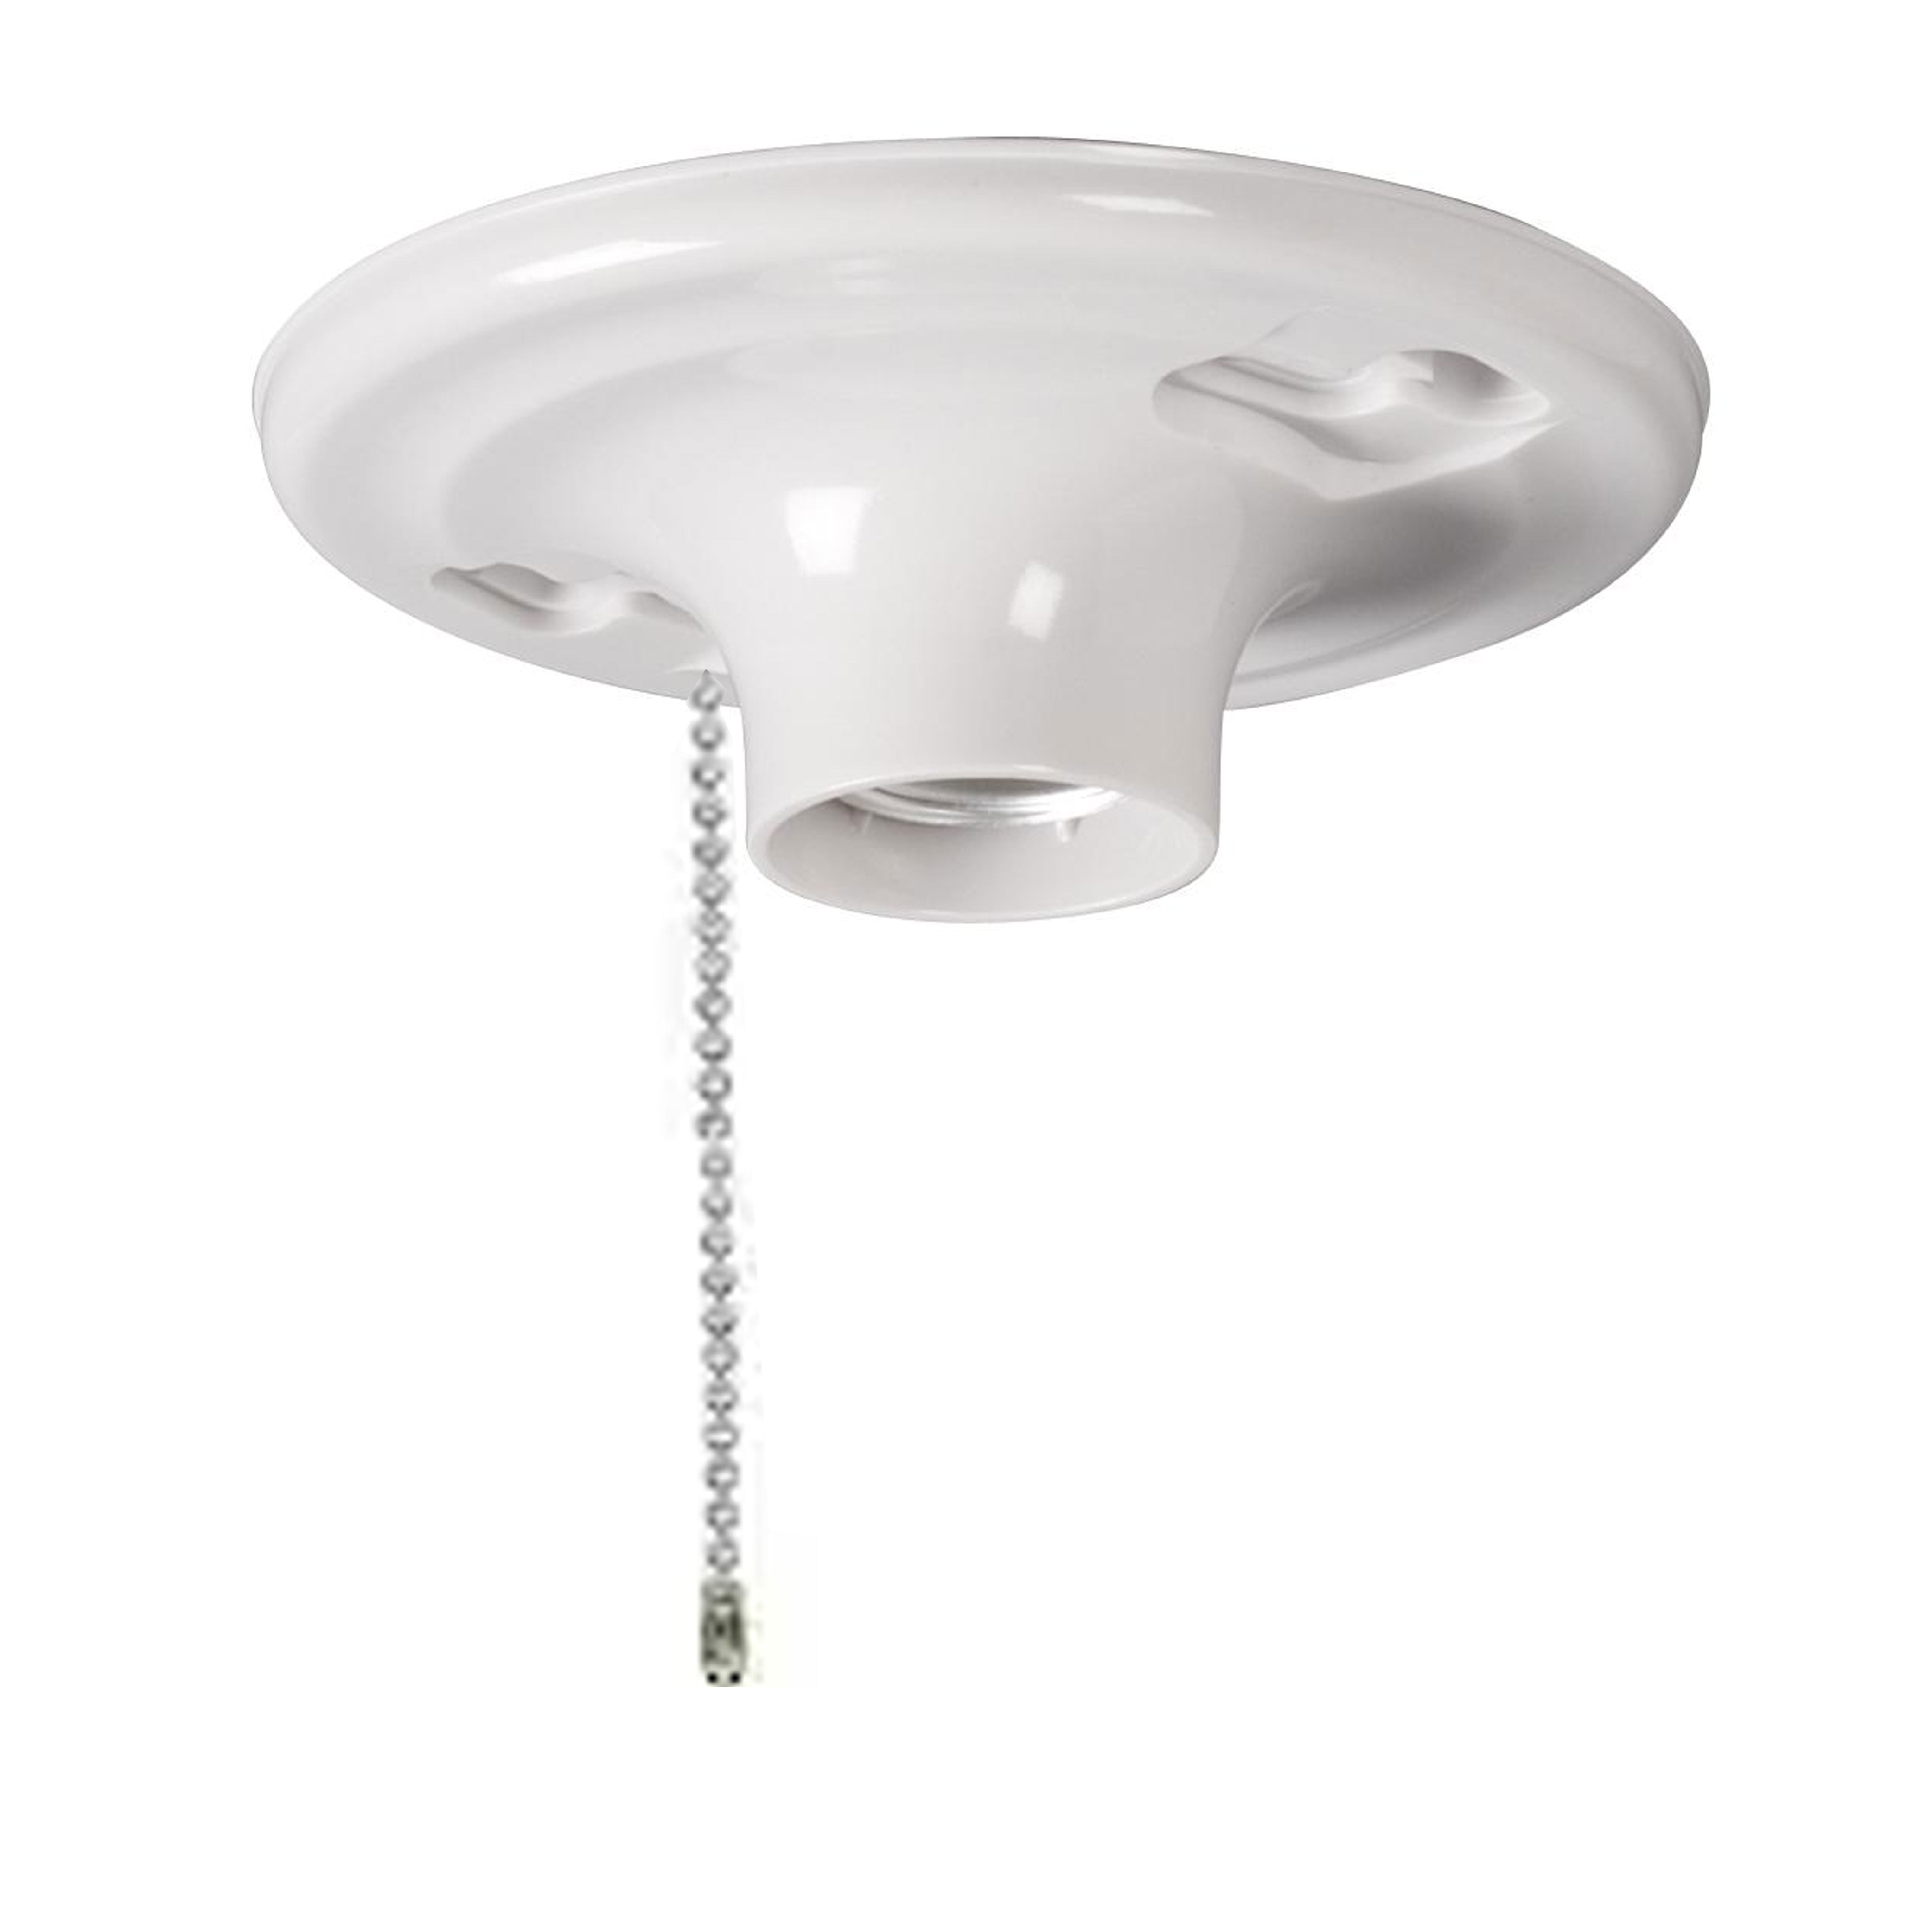 ATB 1 Porcelain Ceiling Lamp Holder with Socket Pull Chain Bulb Mount Light Fixture 28350